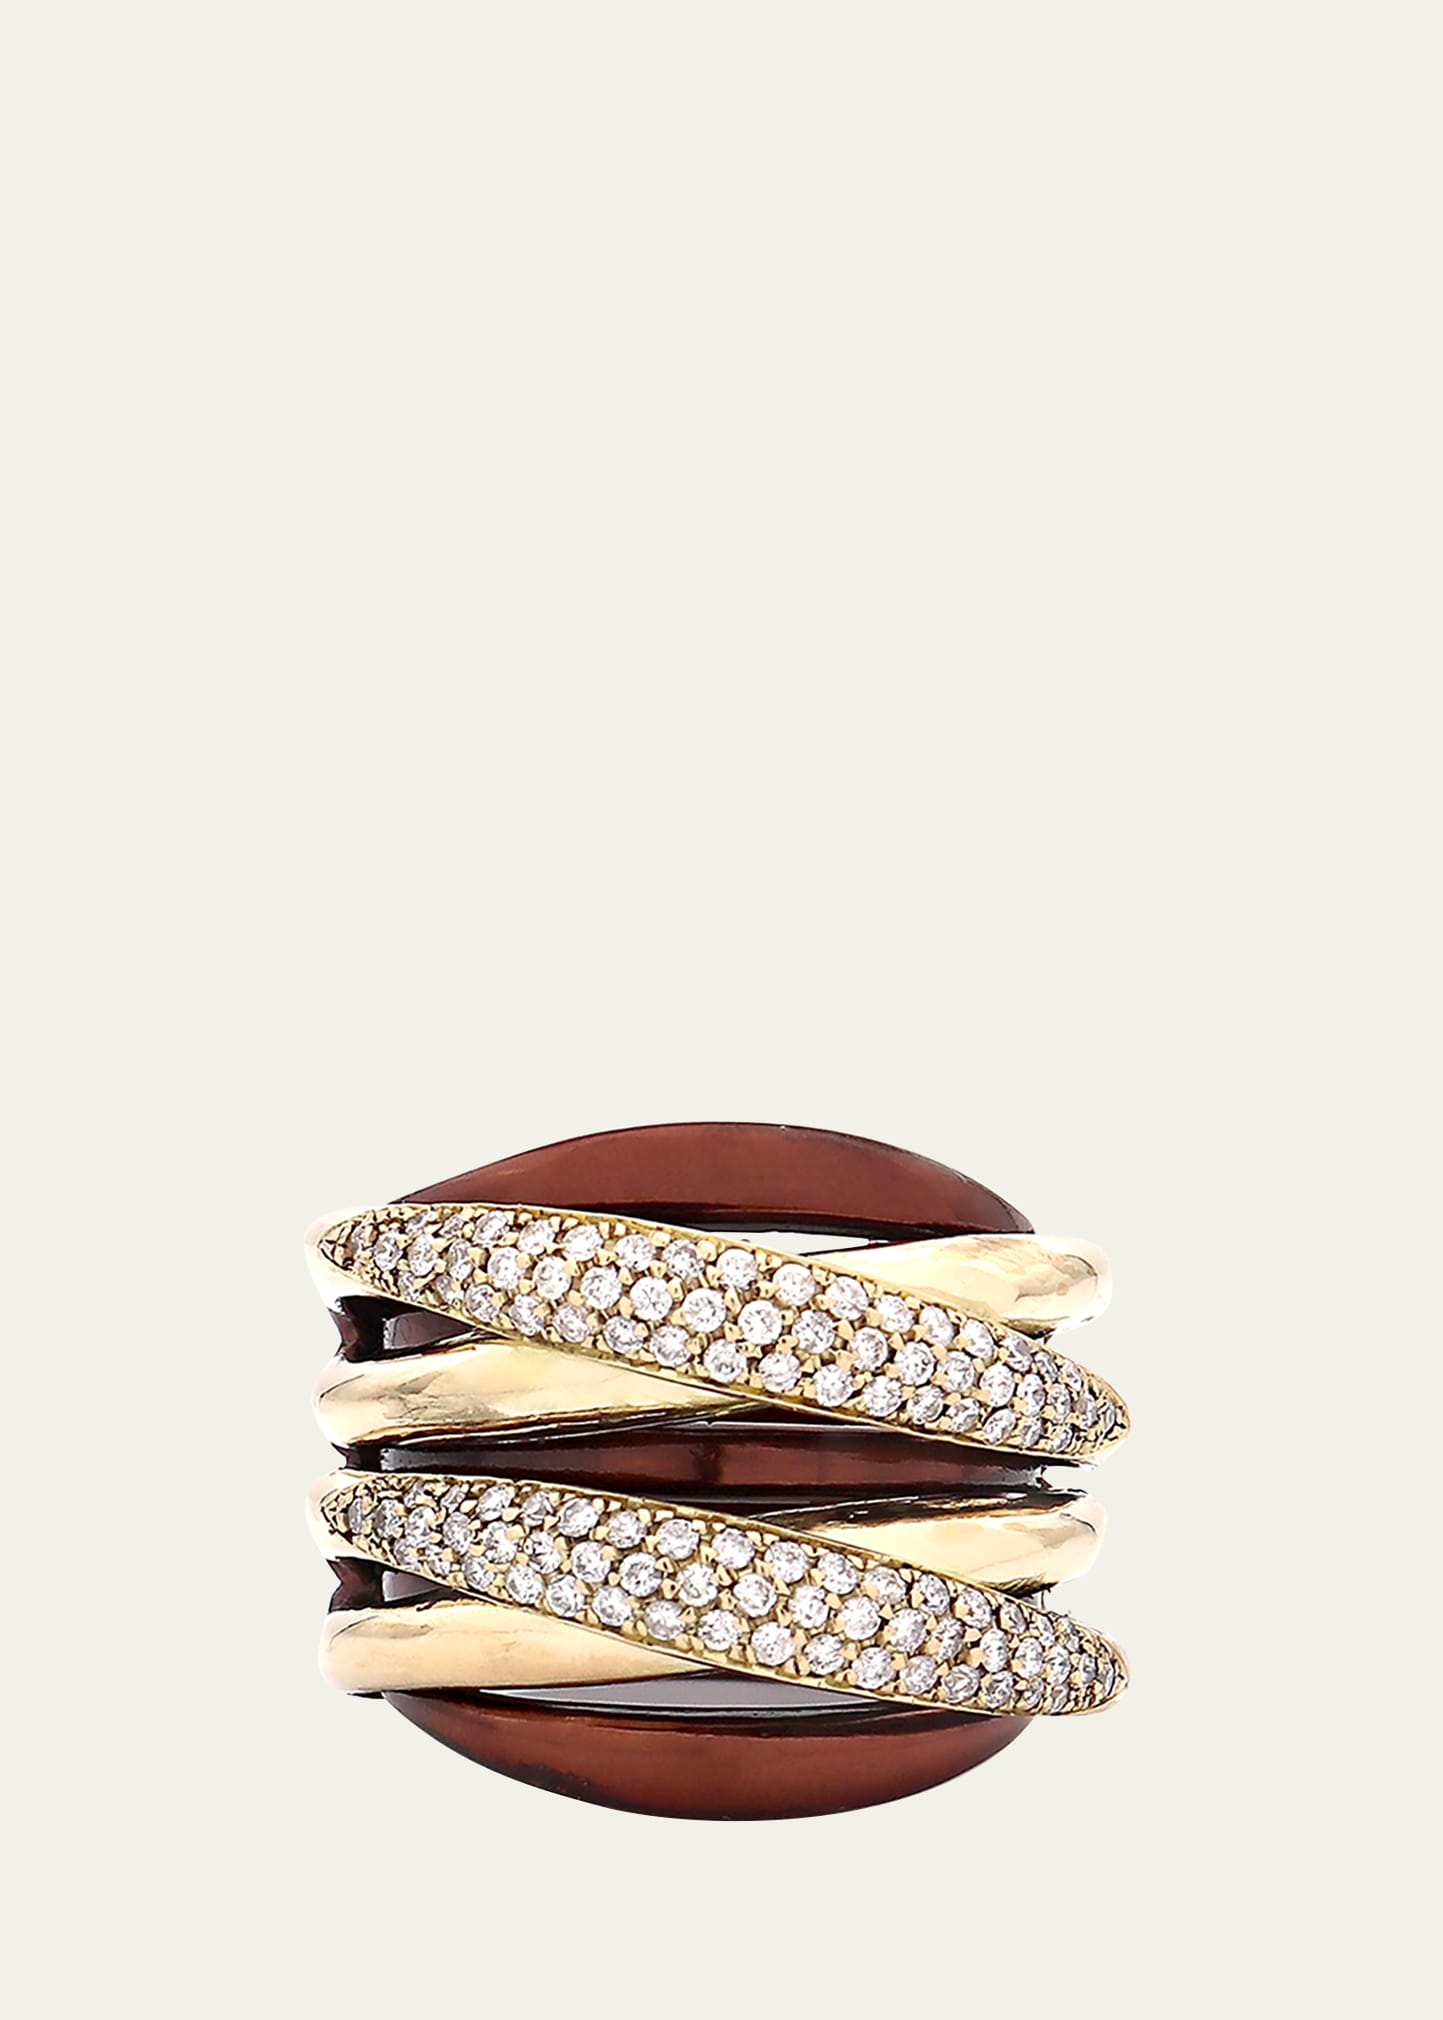 Faraone Mennella Brown Lizzy Ring in 18K Gold, Sterling Silver and White Diamonds